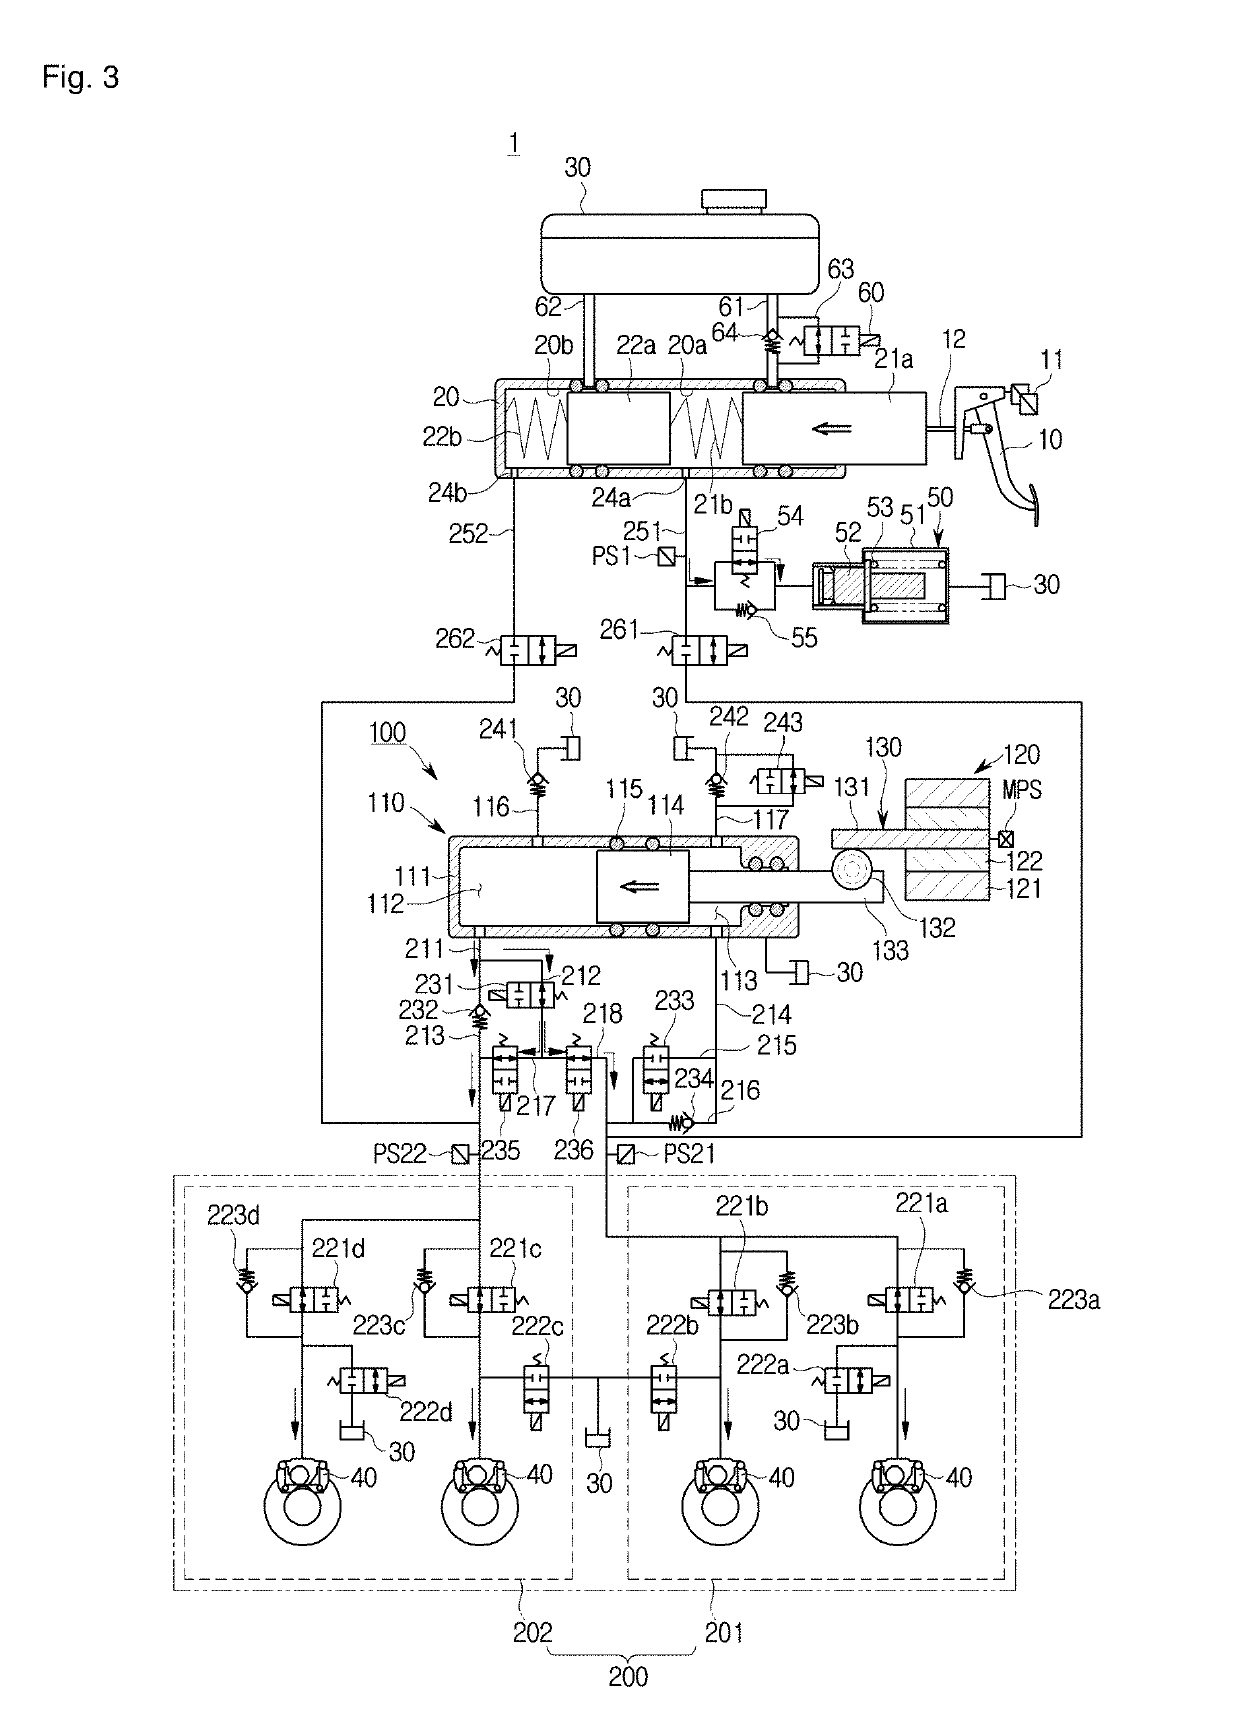 Electronic brake system and method for operating the same